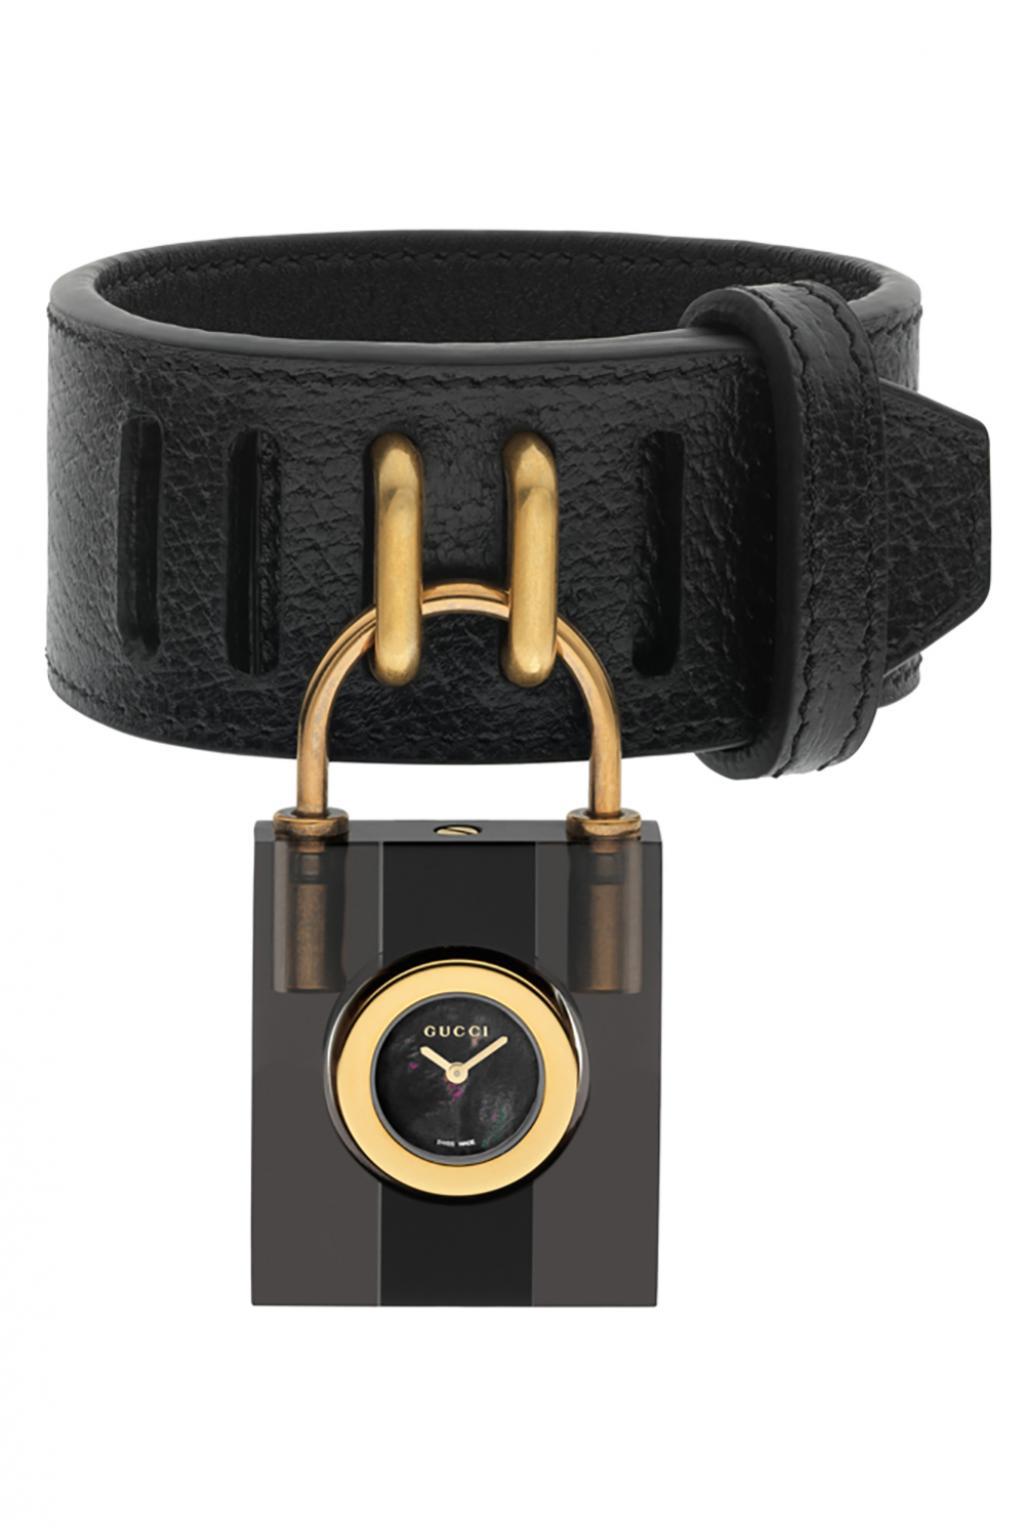 Gucci Leather Watch Lyst